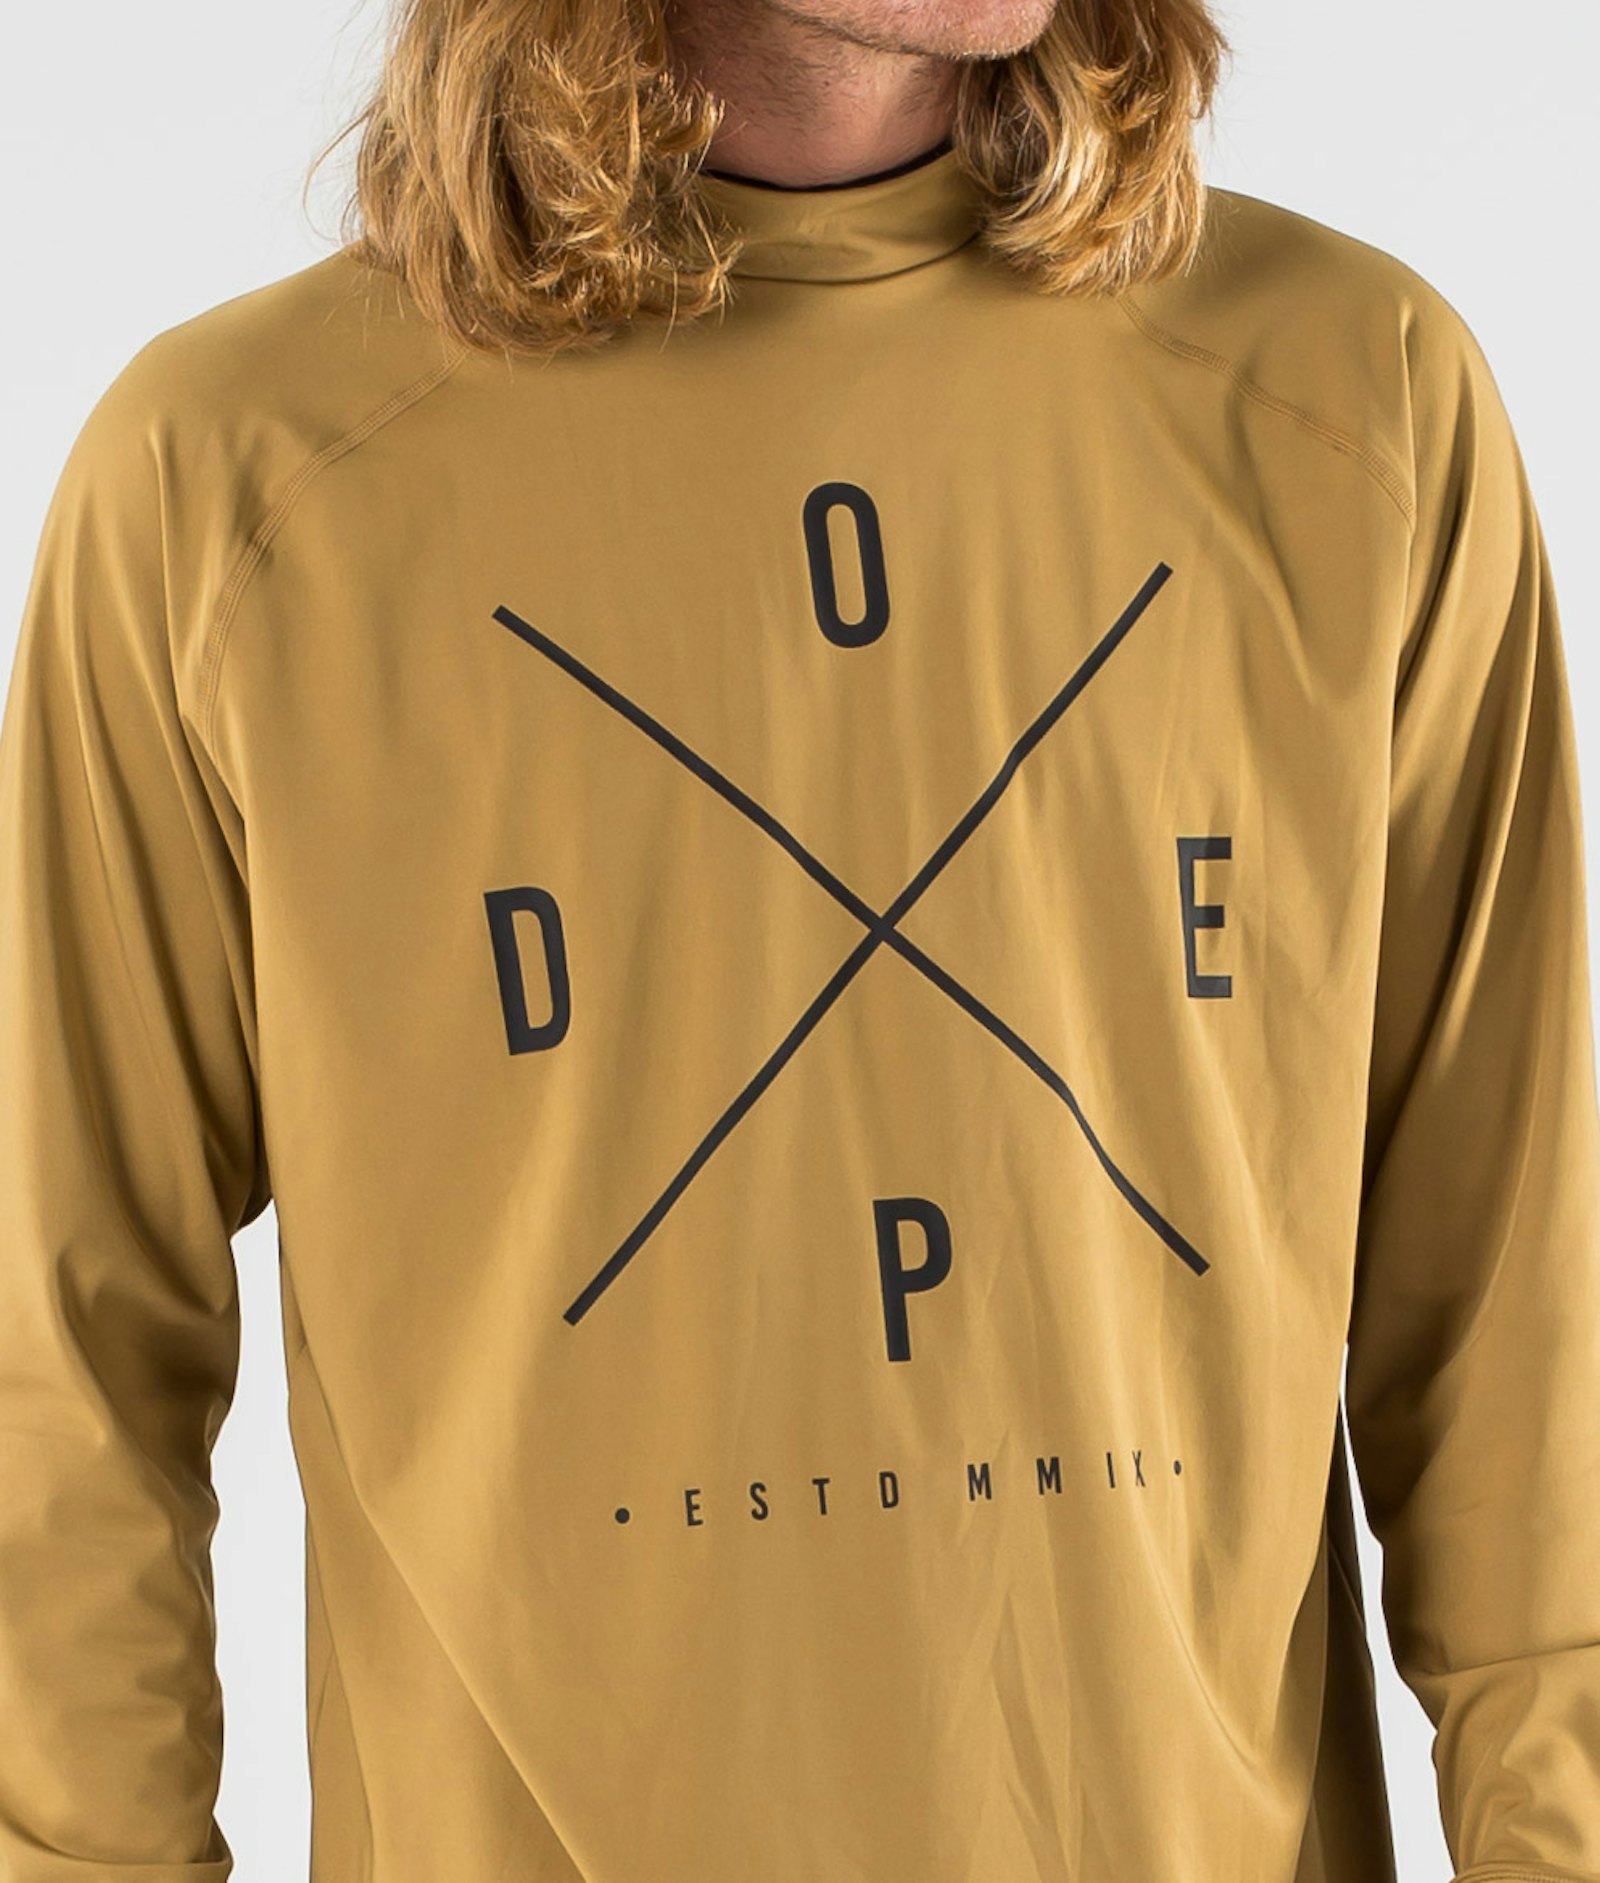 Dope Snuggle Base Layer Top Men 2X-Up Gold